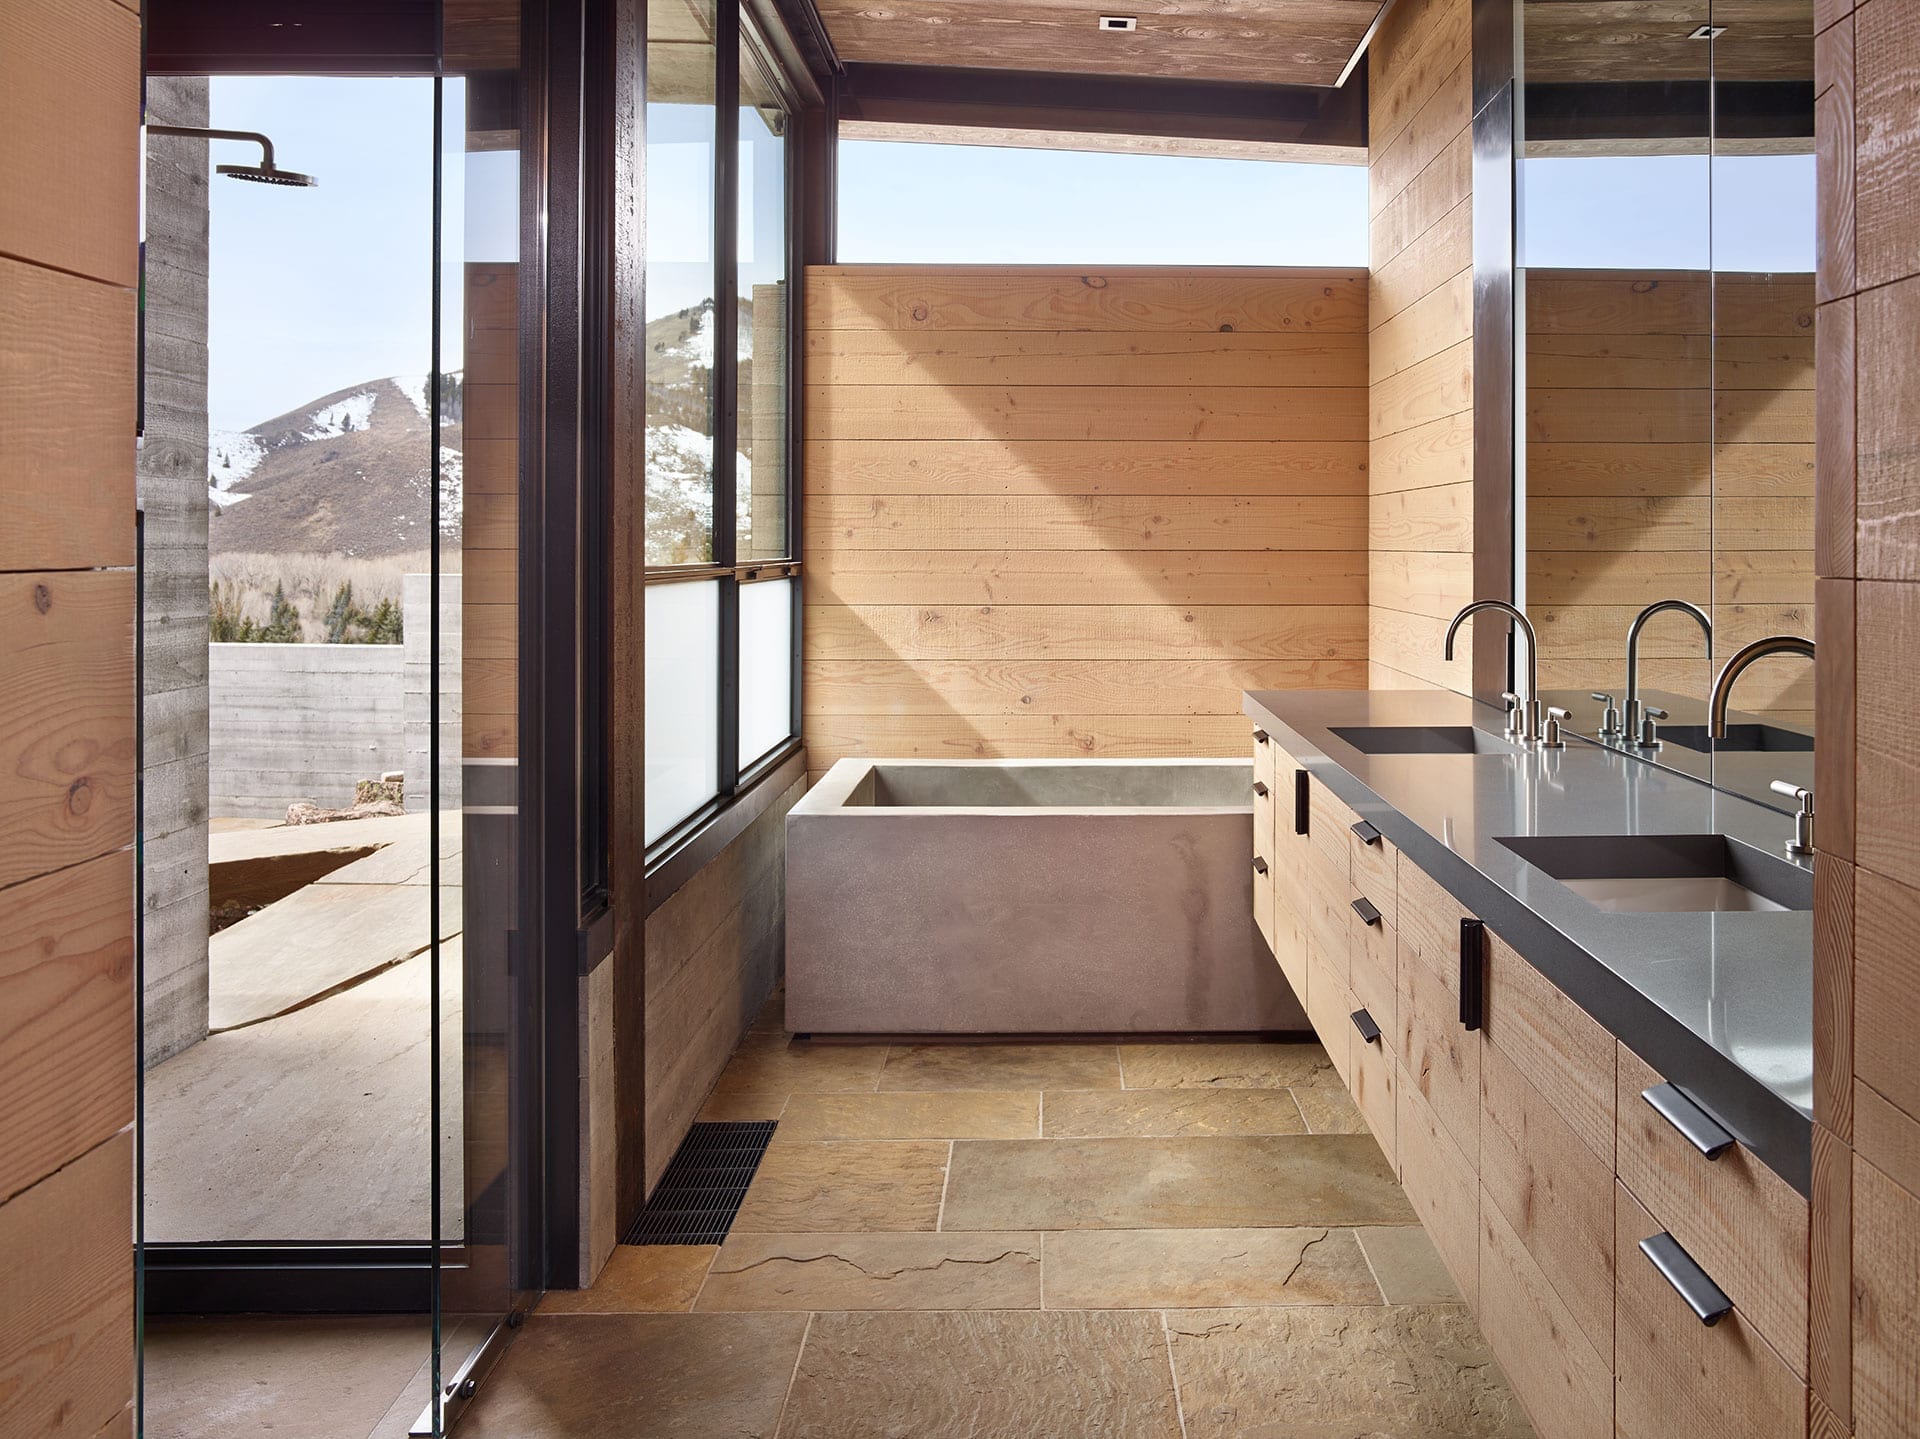 Modern bathroom with concrete style tub and steel windows